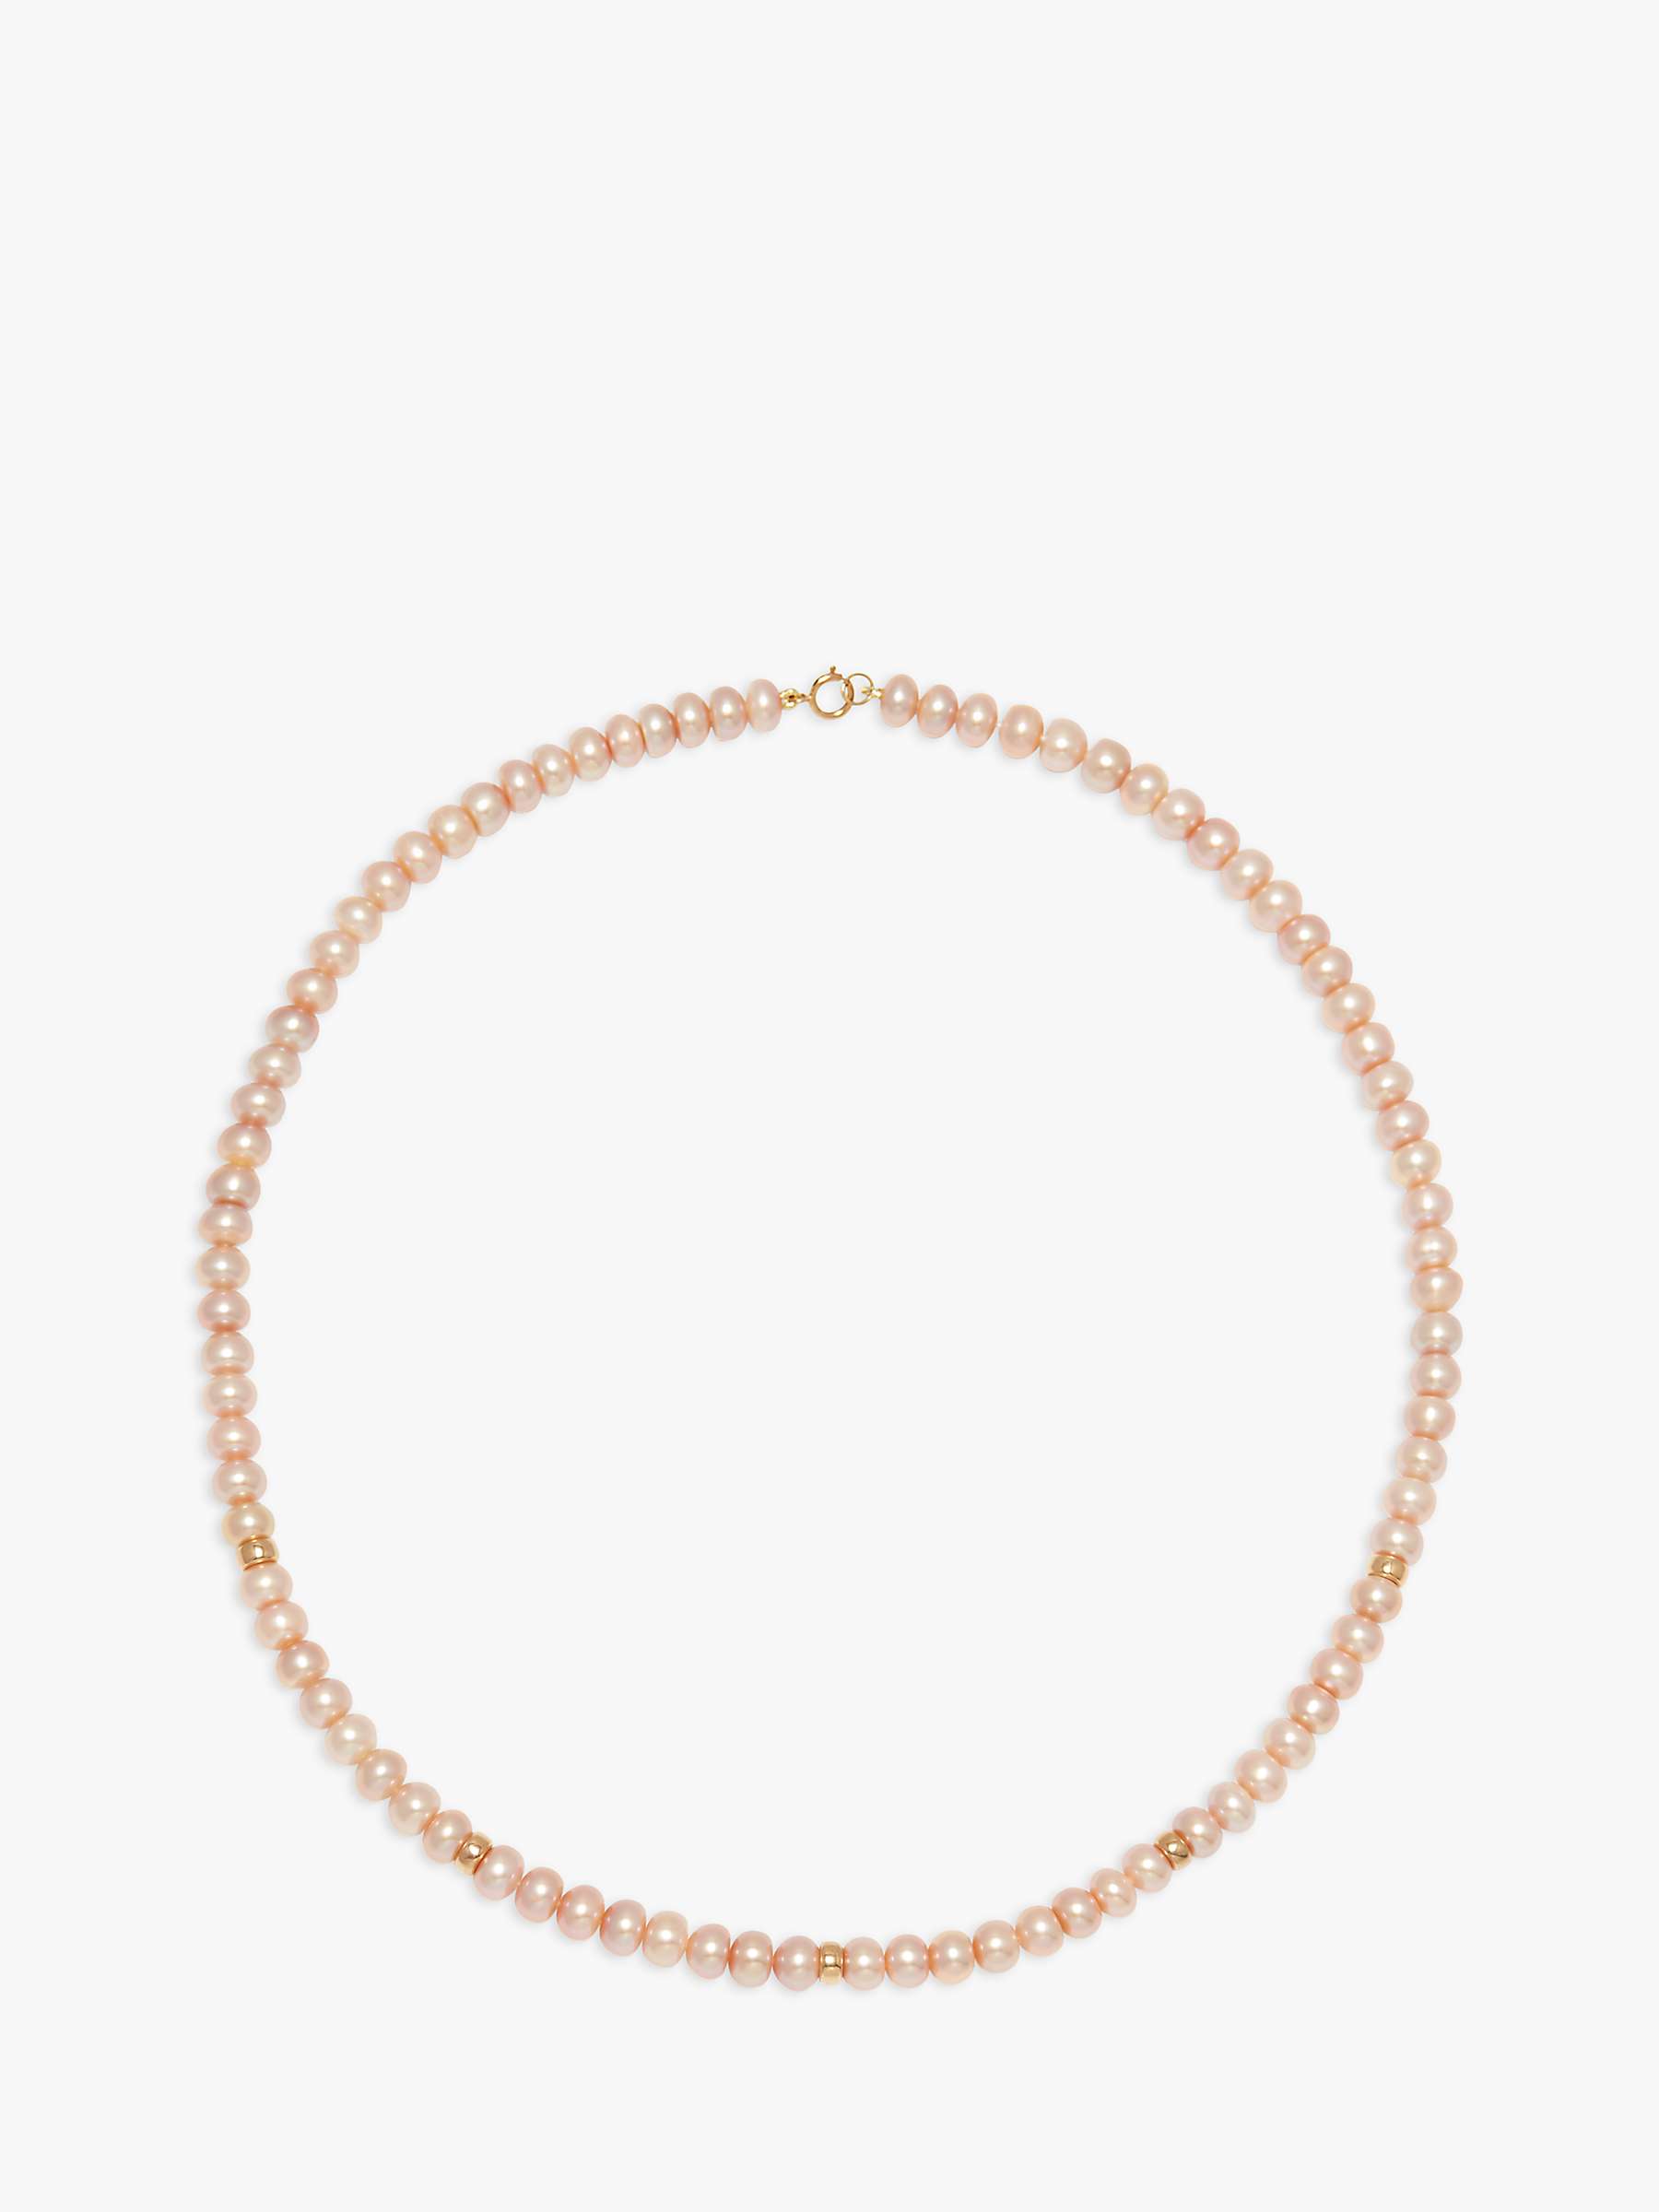 Buy A B Davis 9ct Gold Freshwater Button Pearl Necklace, Pink Online at johnlewis.com